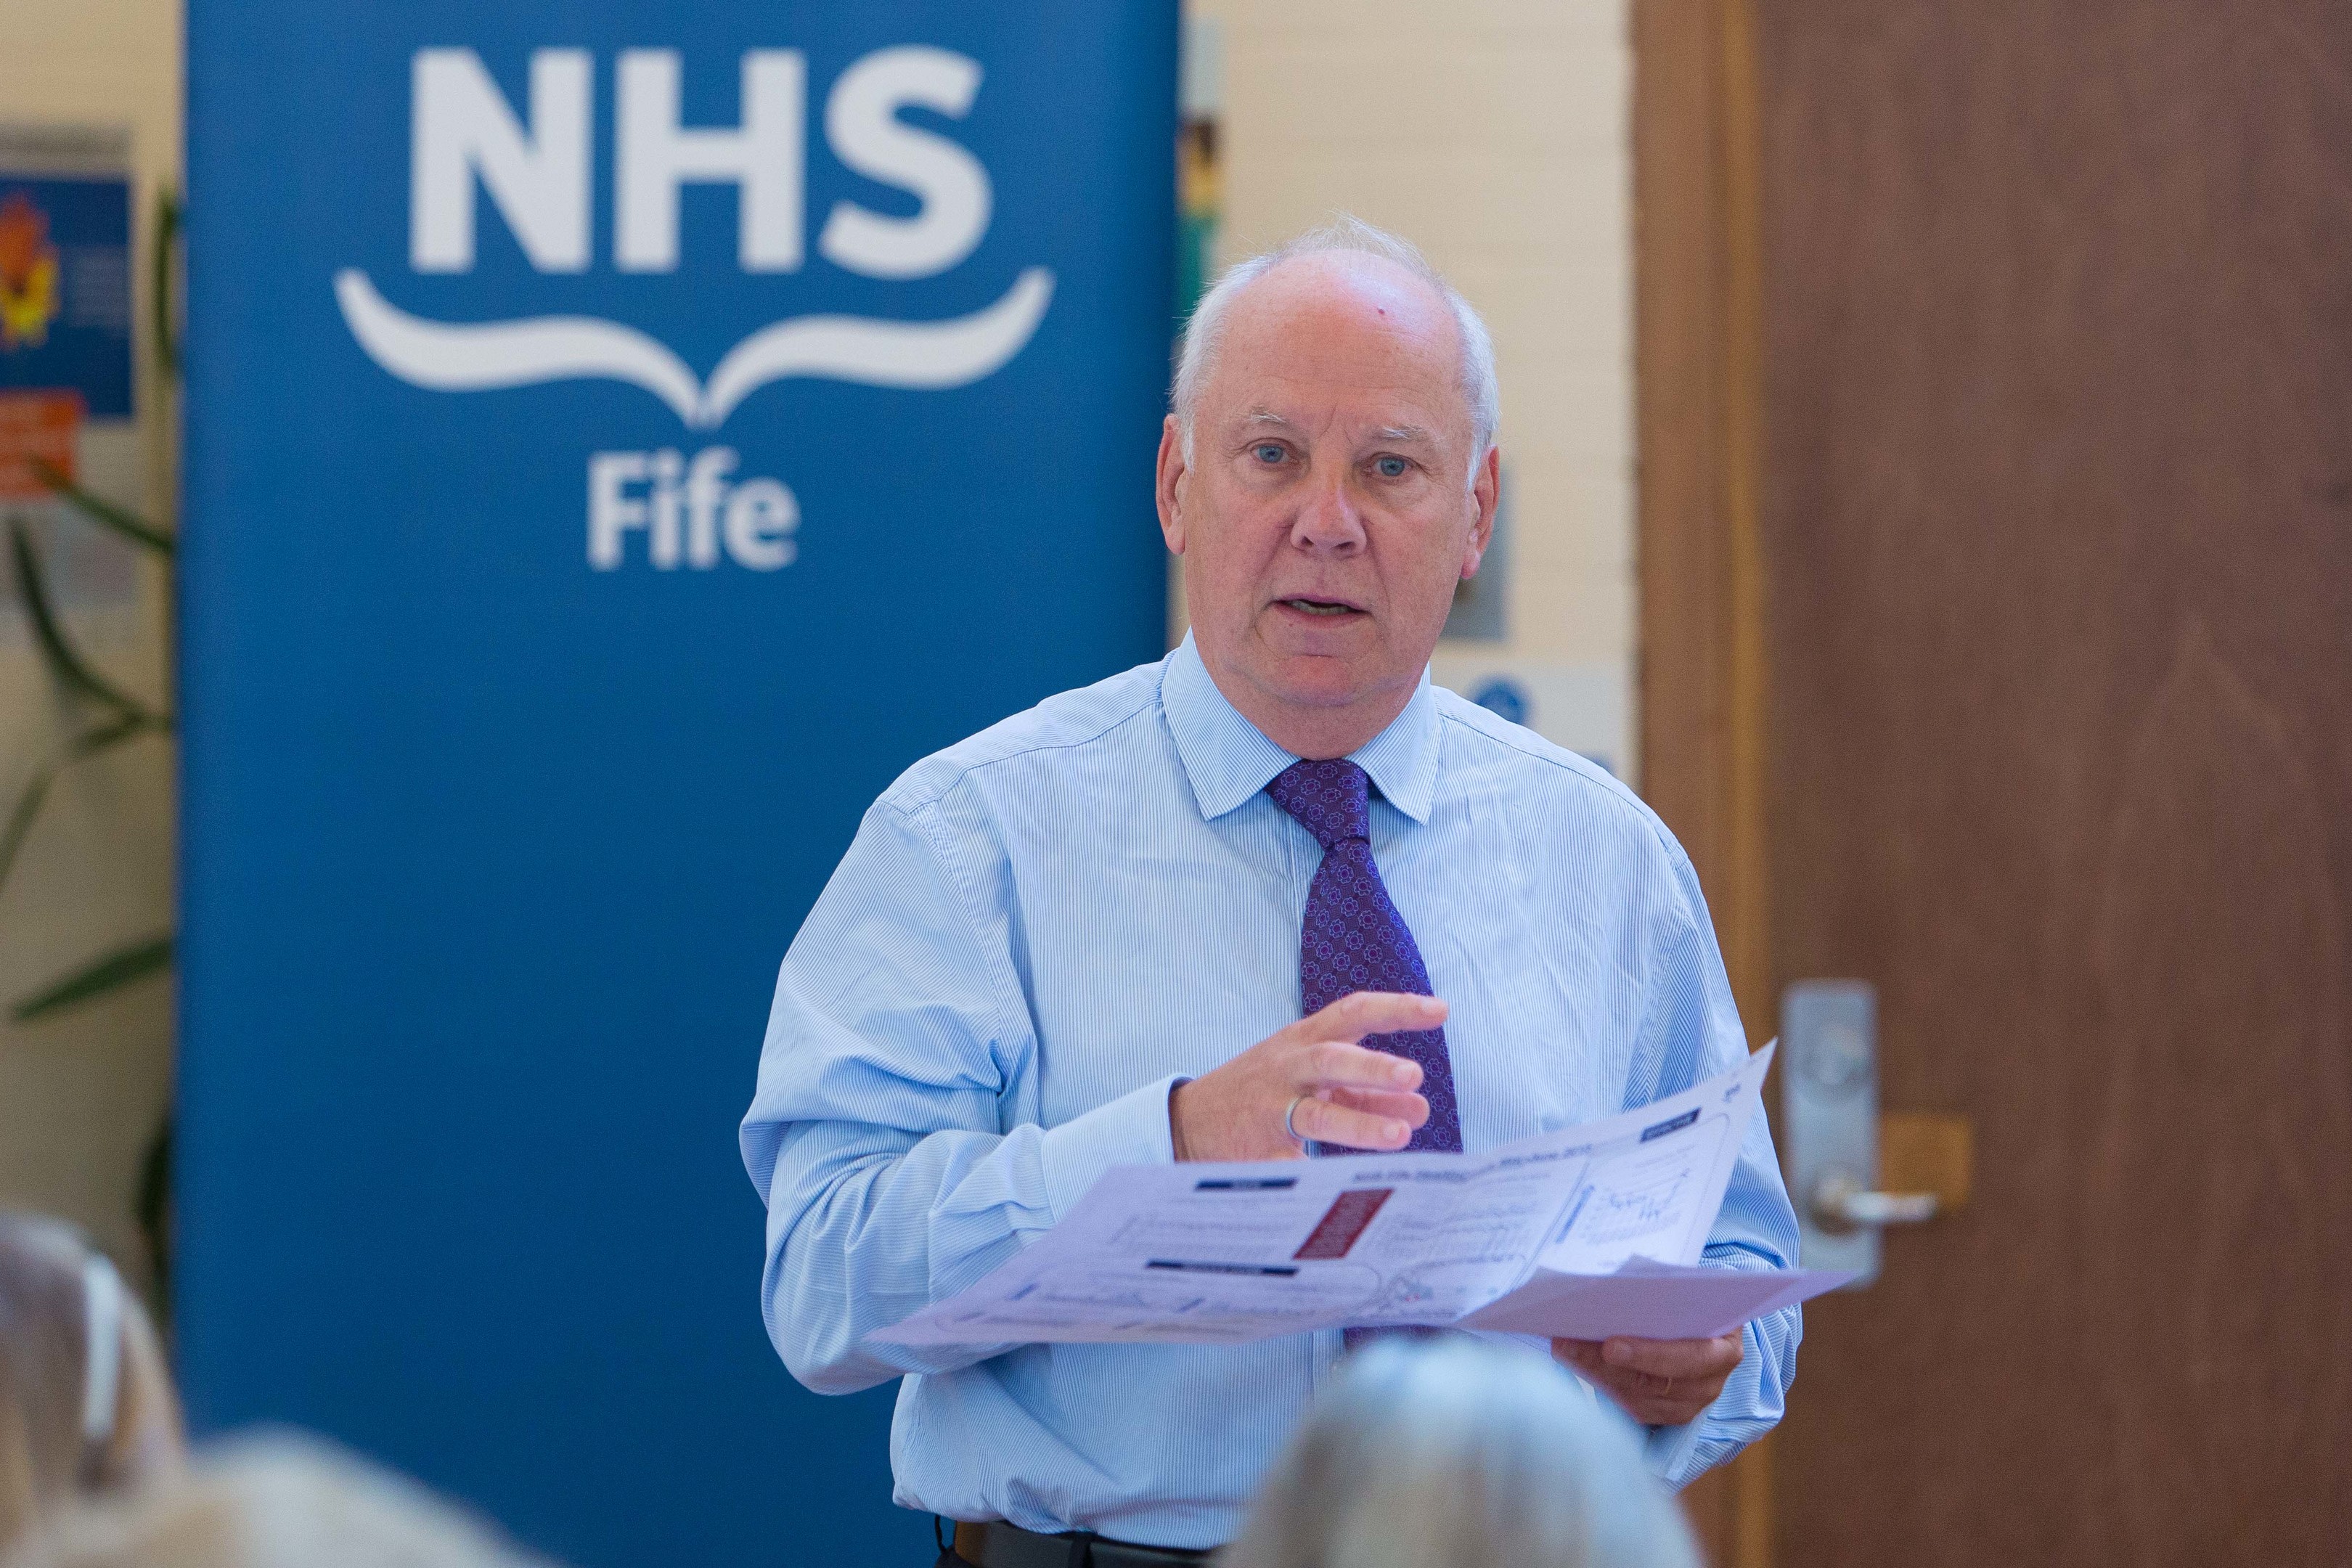 Allan Burns has said patient safety will not be sacrificed.